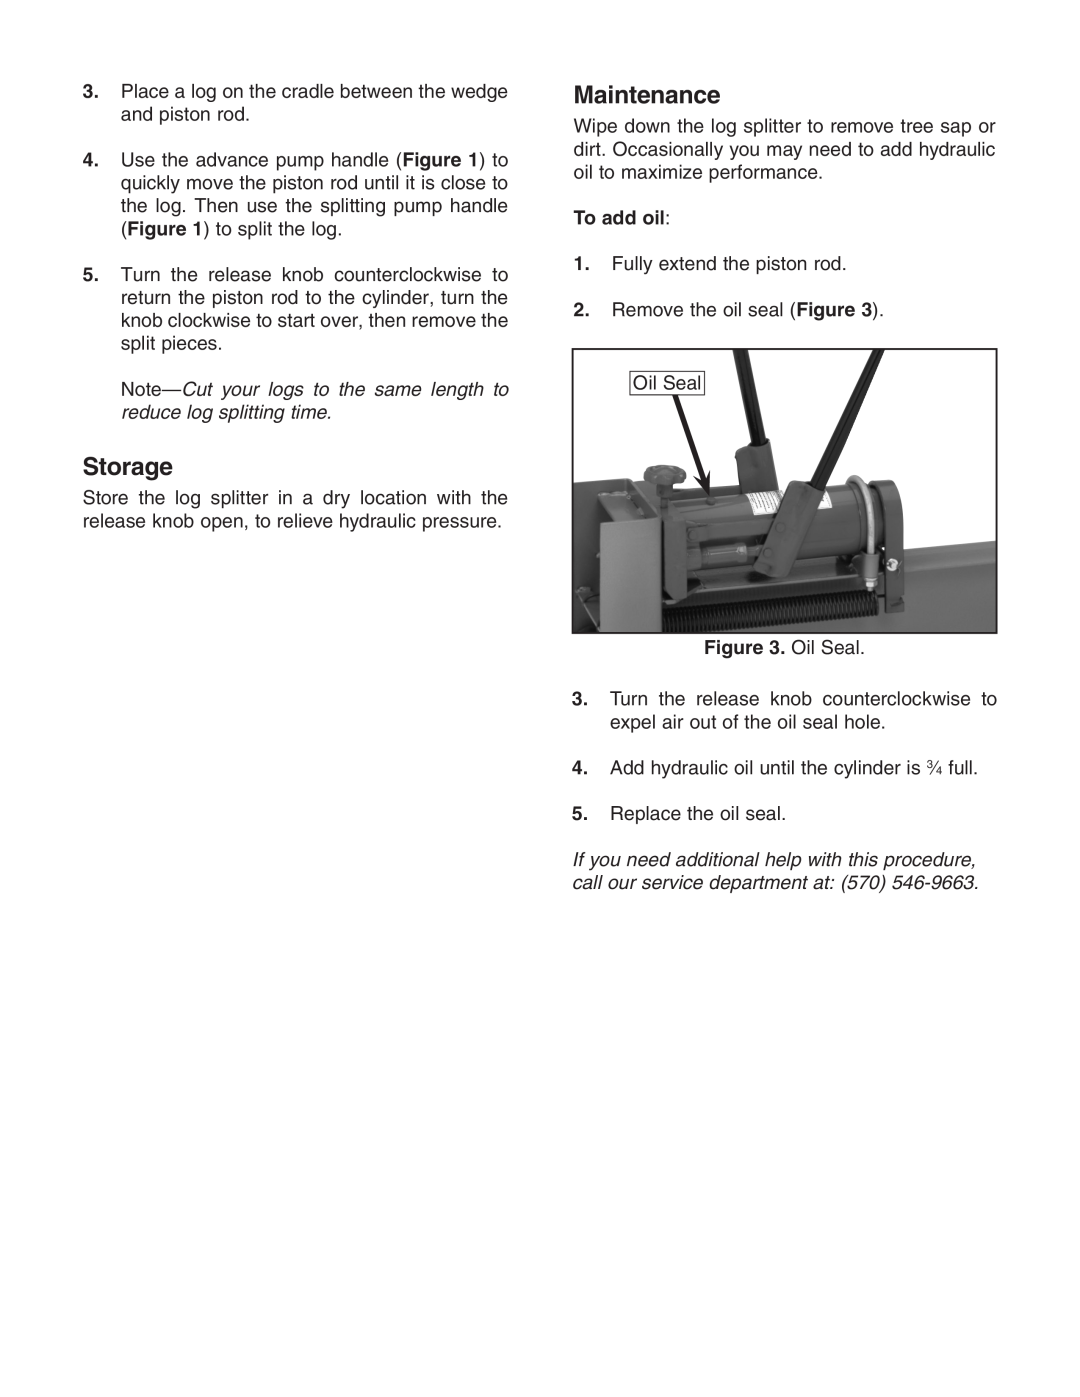 Grizzly H6239 instruction sheet Storage, Maintenance, To add oil, Oil Seal 